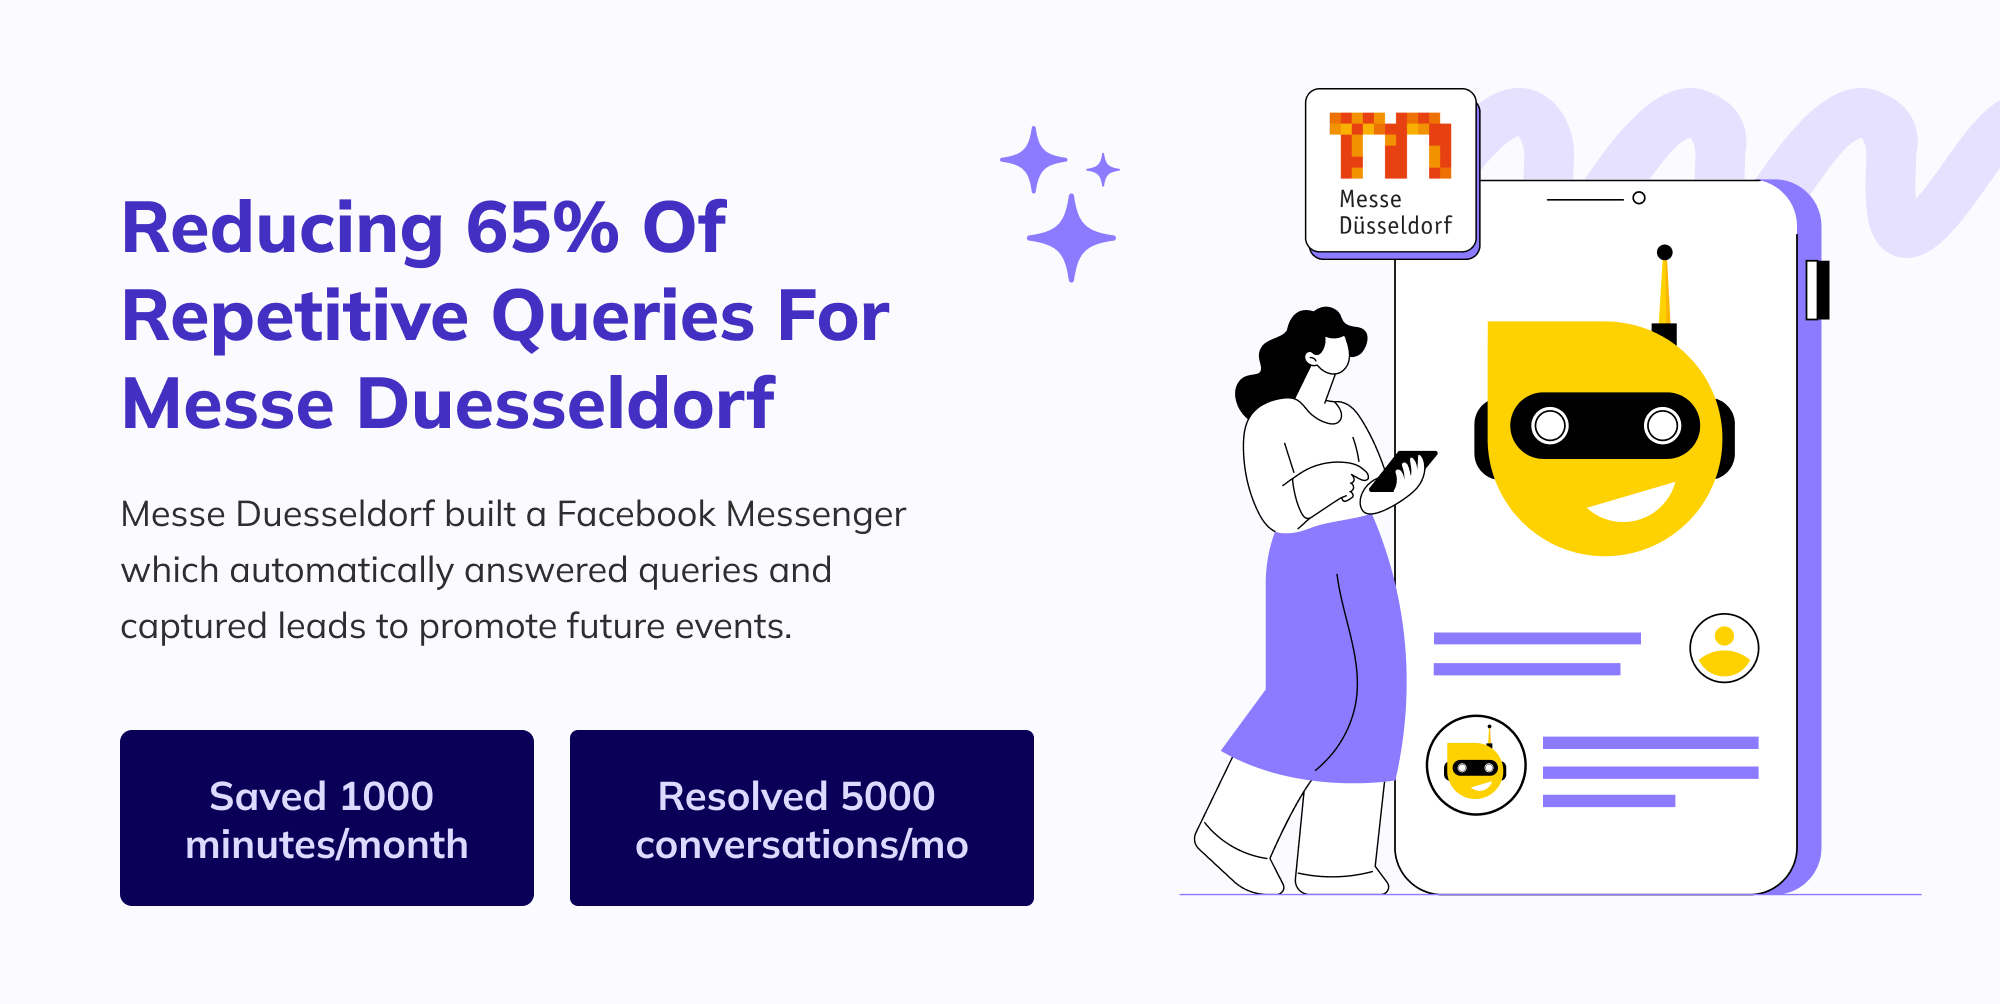 Graphic with the title 'Reducing 65% Of Repetitive Queries For Messe Duesseldorf' on the left side, detailing how Messe Duesseldorf built a Facebook Messenger bot to automatically answer queries and capture leads for future events. Below the text, two highlighted stats are 'Saved 1000 minutes/month' and 'Resolved 5000 conversations/mo'. On the right side, an illustration depicts a person holding a tablet next to a large smartphone screen displaying a cheerful yellow robot face.